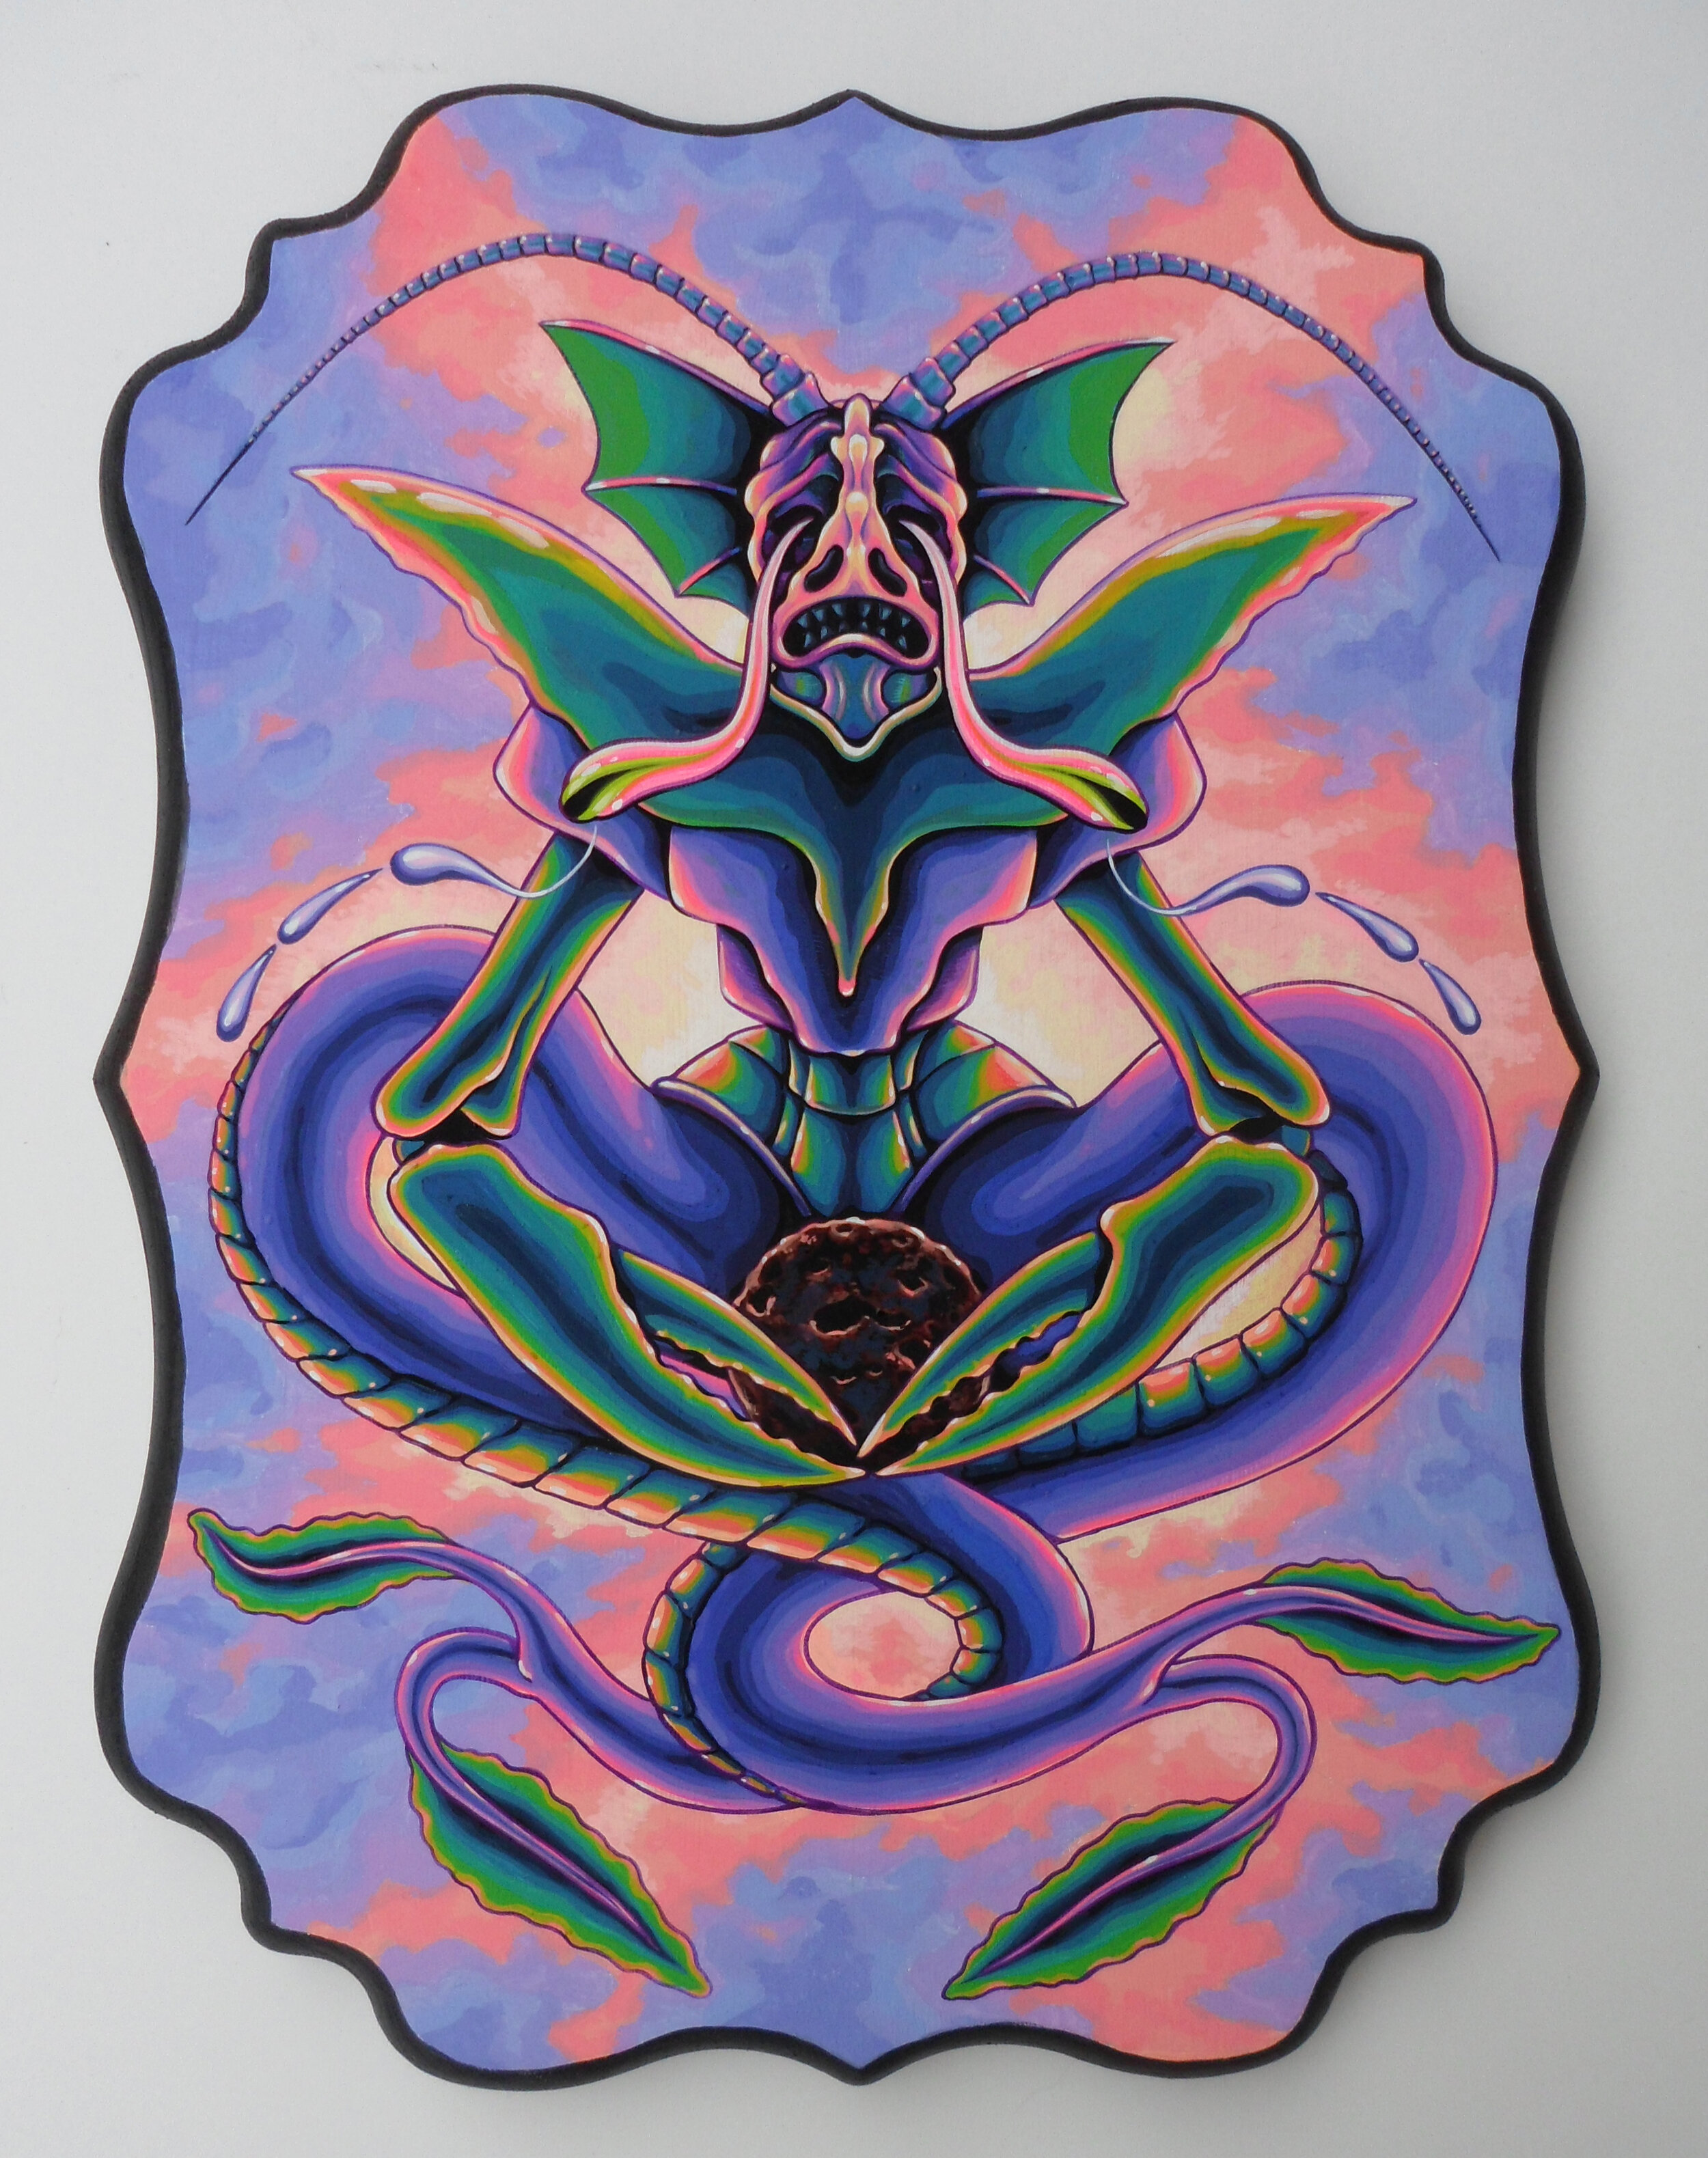  “Mourner” acryla gouache on wood panel. For Beautiful Monsters group show 